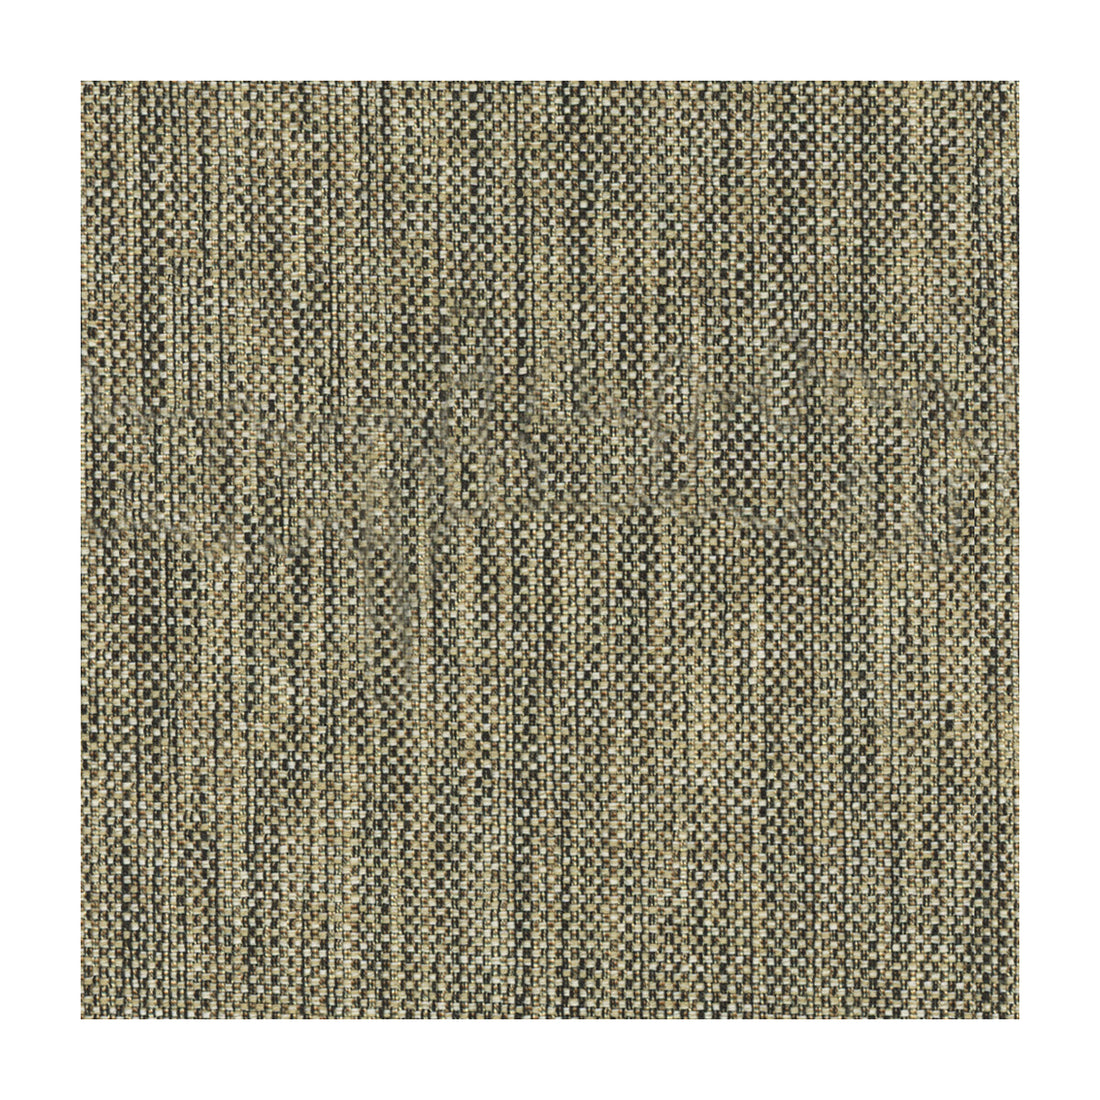 Asean fabric in espresso color - pattern 30023.640.0 - by Kravet Basics in the Candice Olson collection